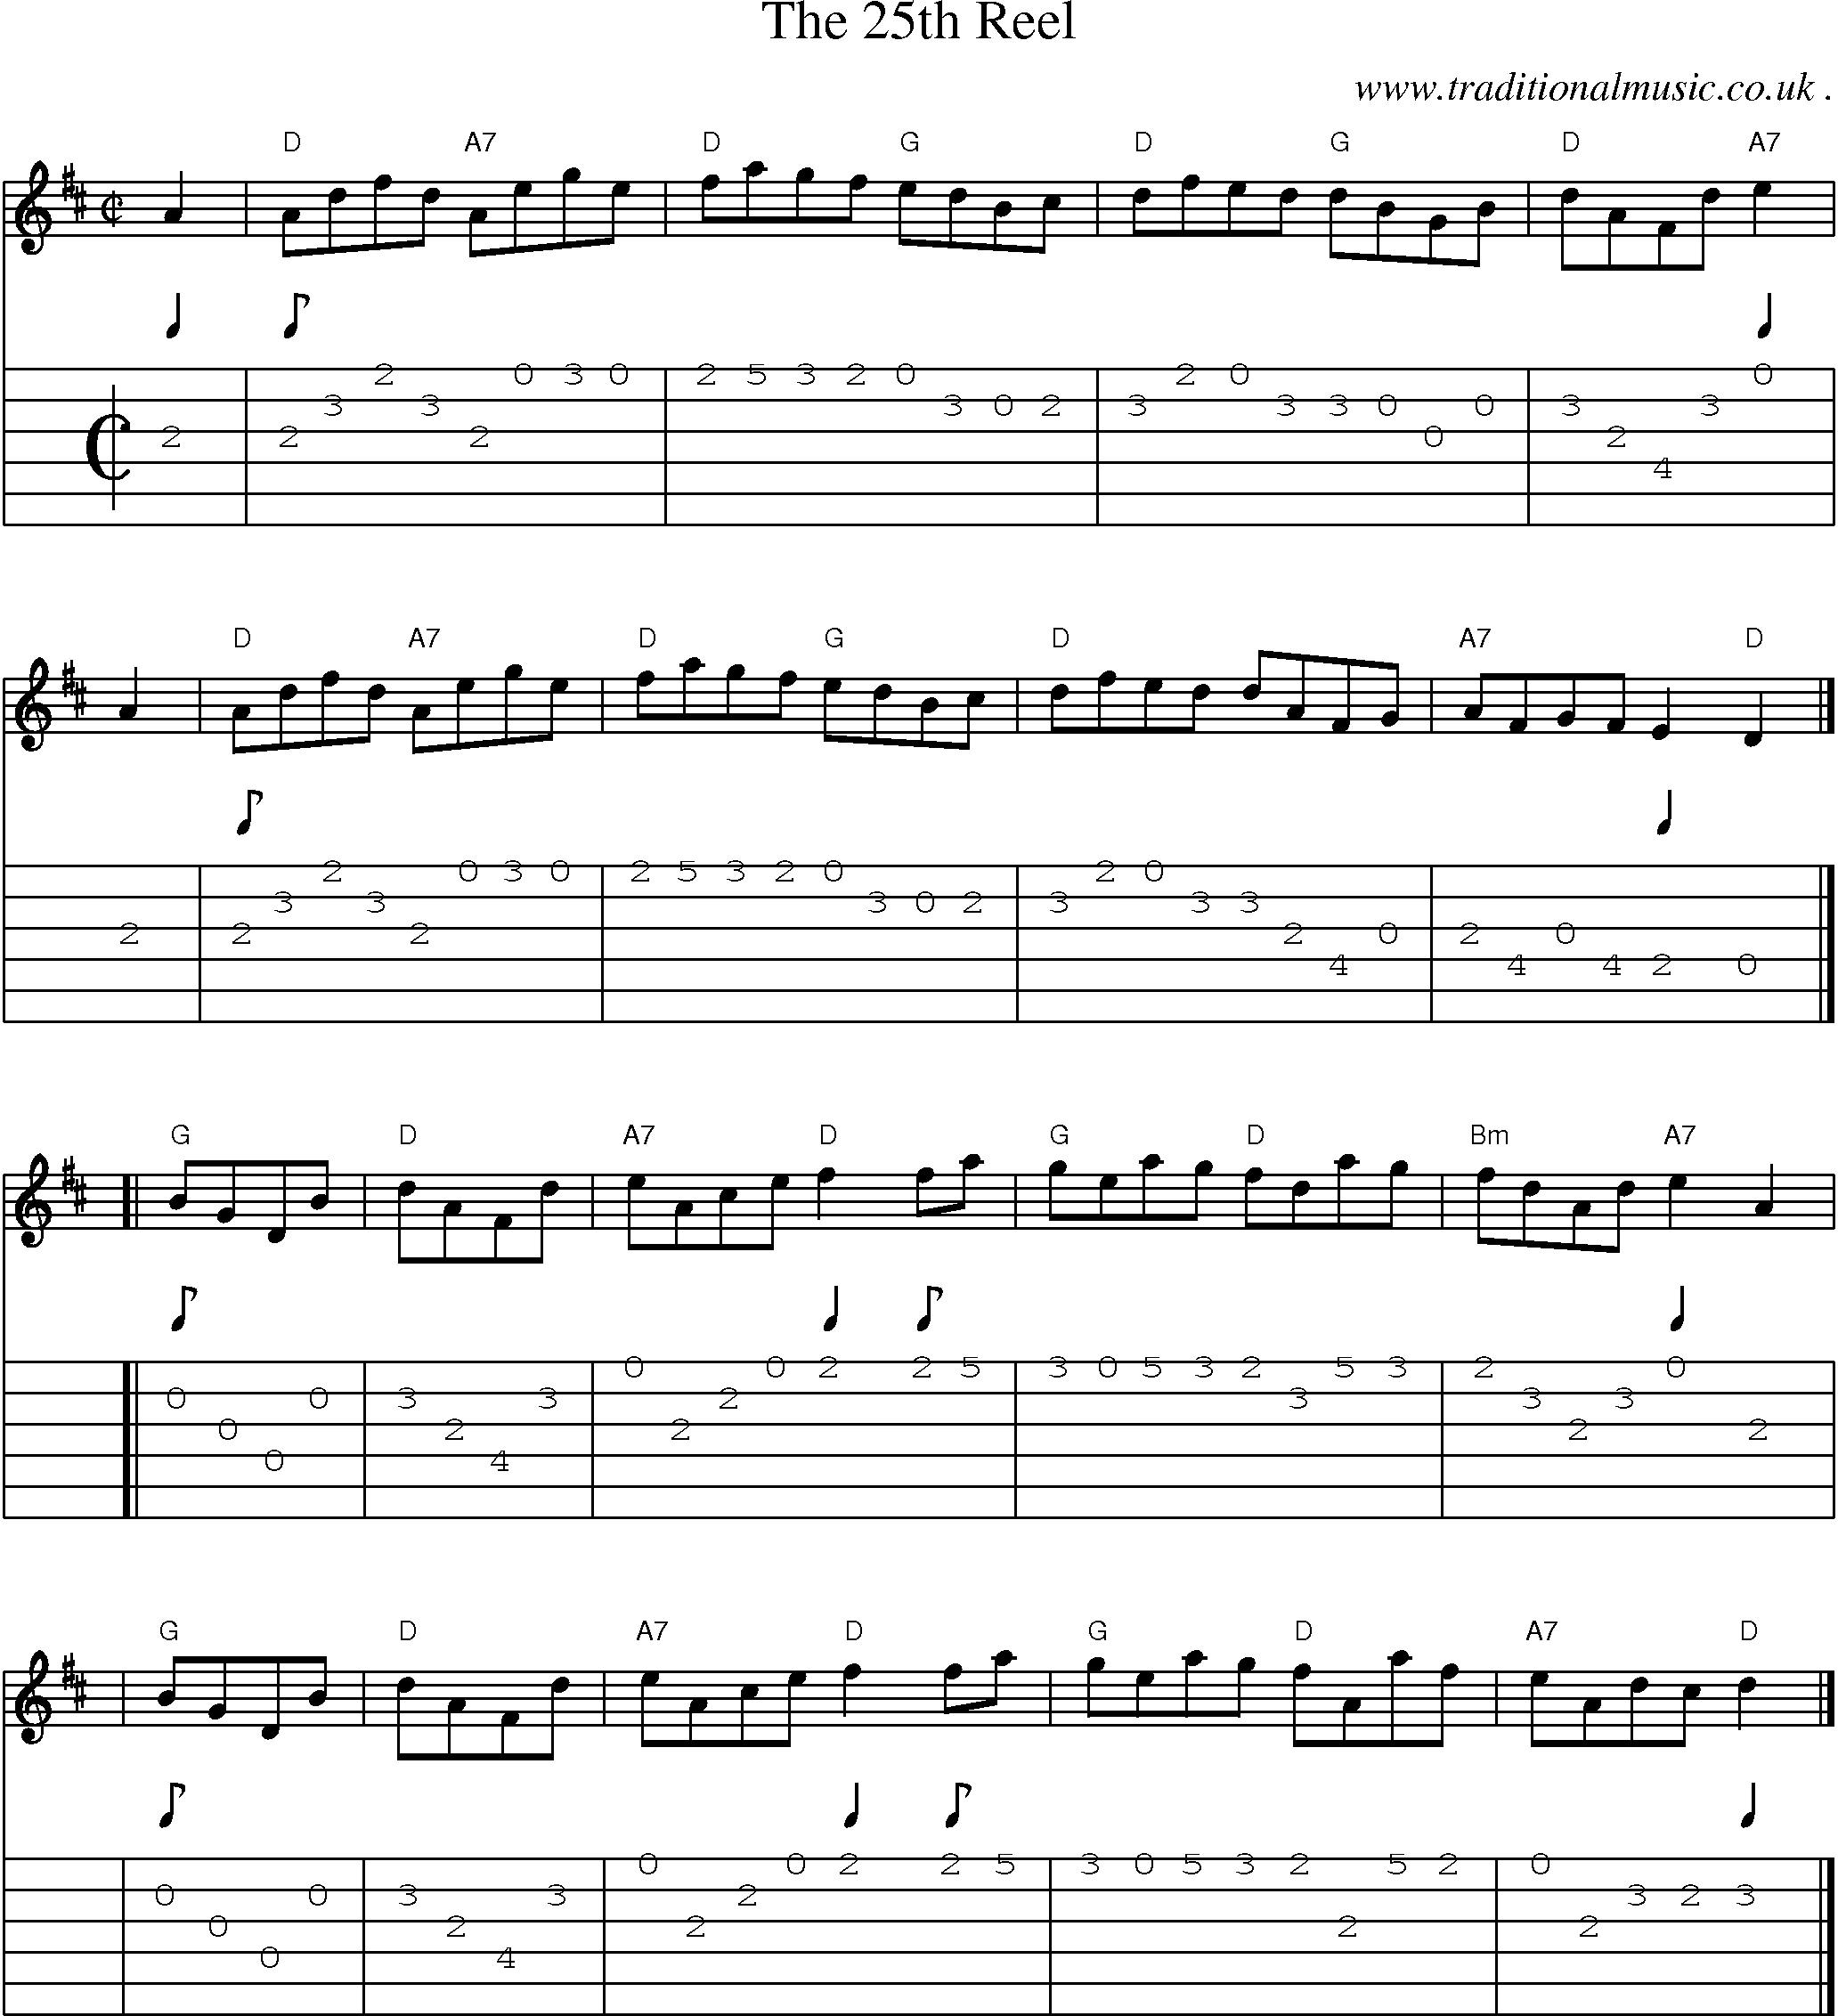 Sheet-music  score, Chords and Guitar Tabs for The 25th Reel